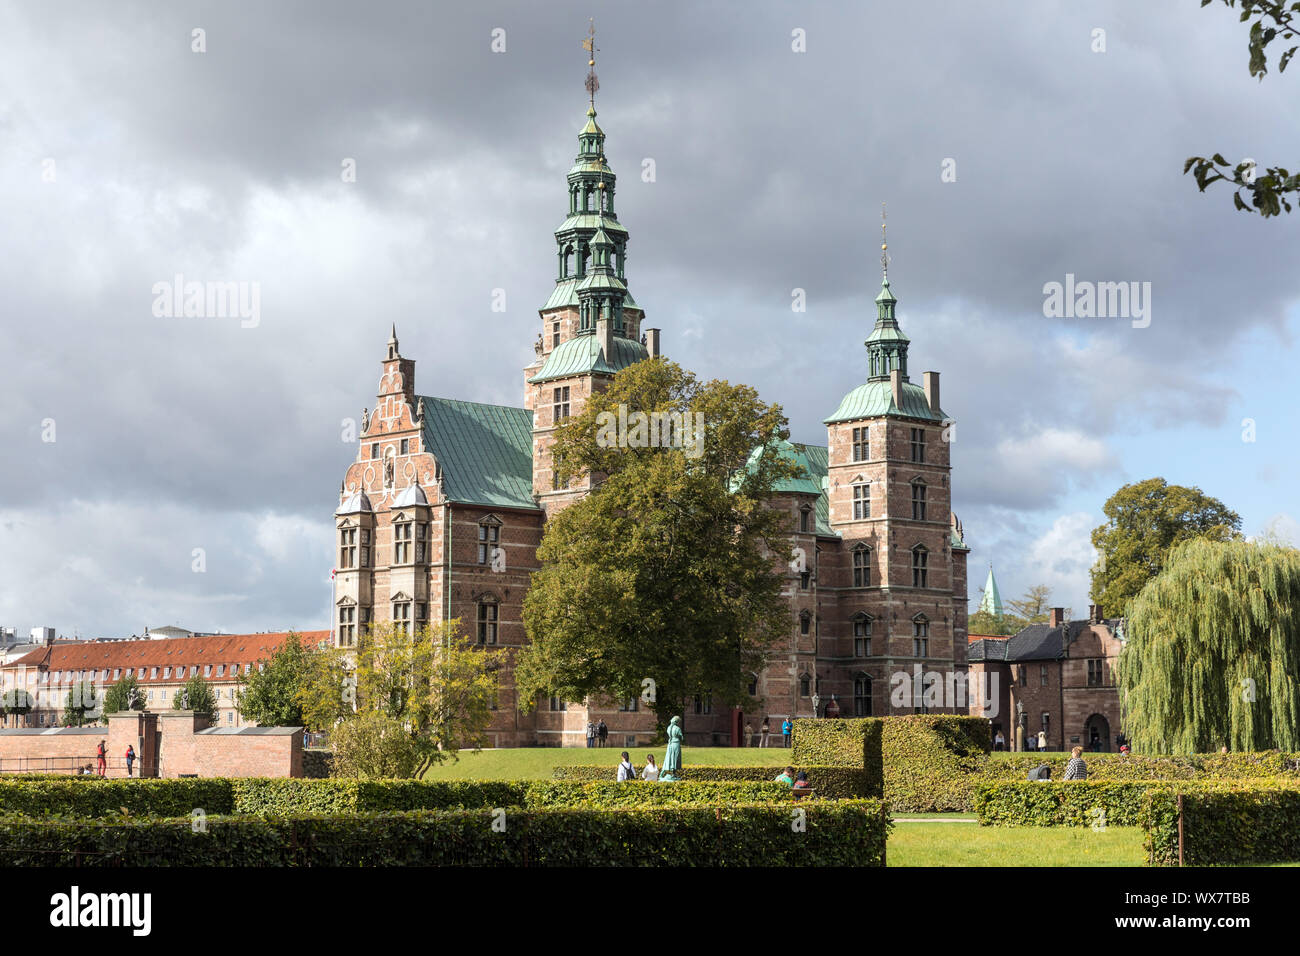 The Rosenborg Castle in Copenhagen, a 17th century royal palace and museum Stock Photo